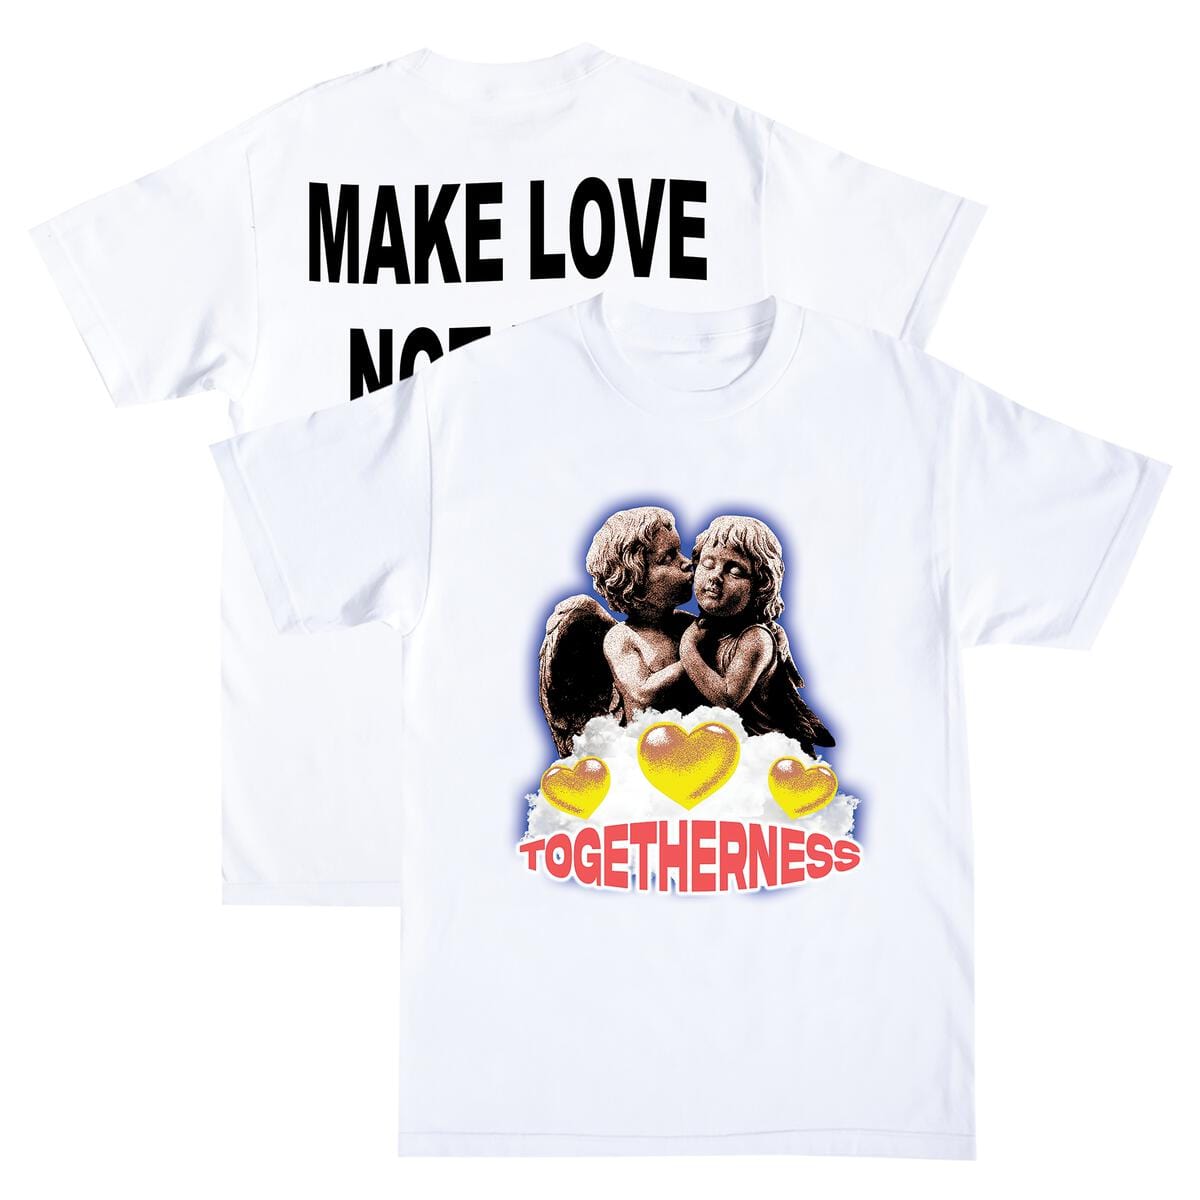 LONLY HEARTS T SHIRT S / white Togetherness T-shirt